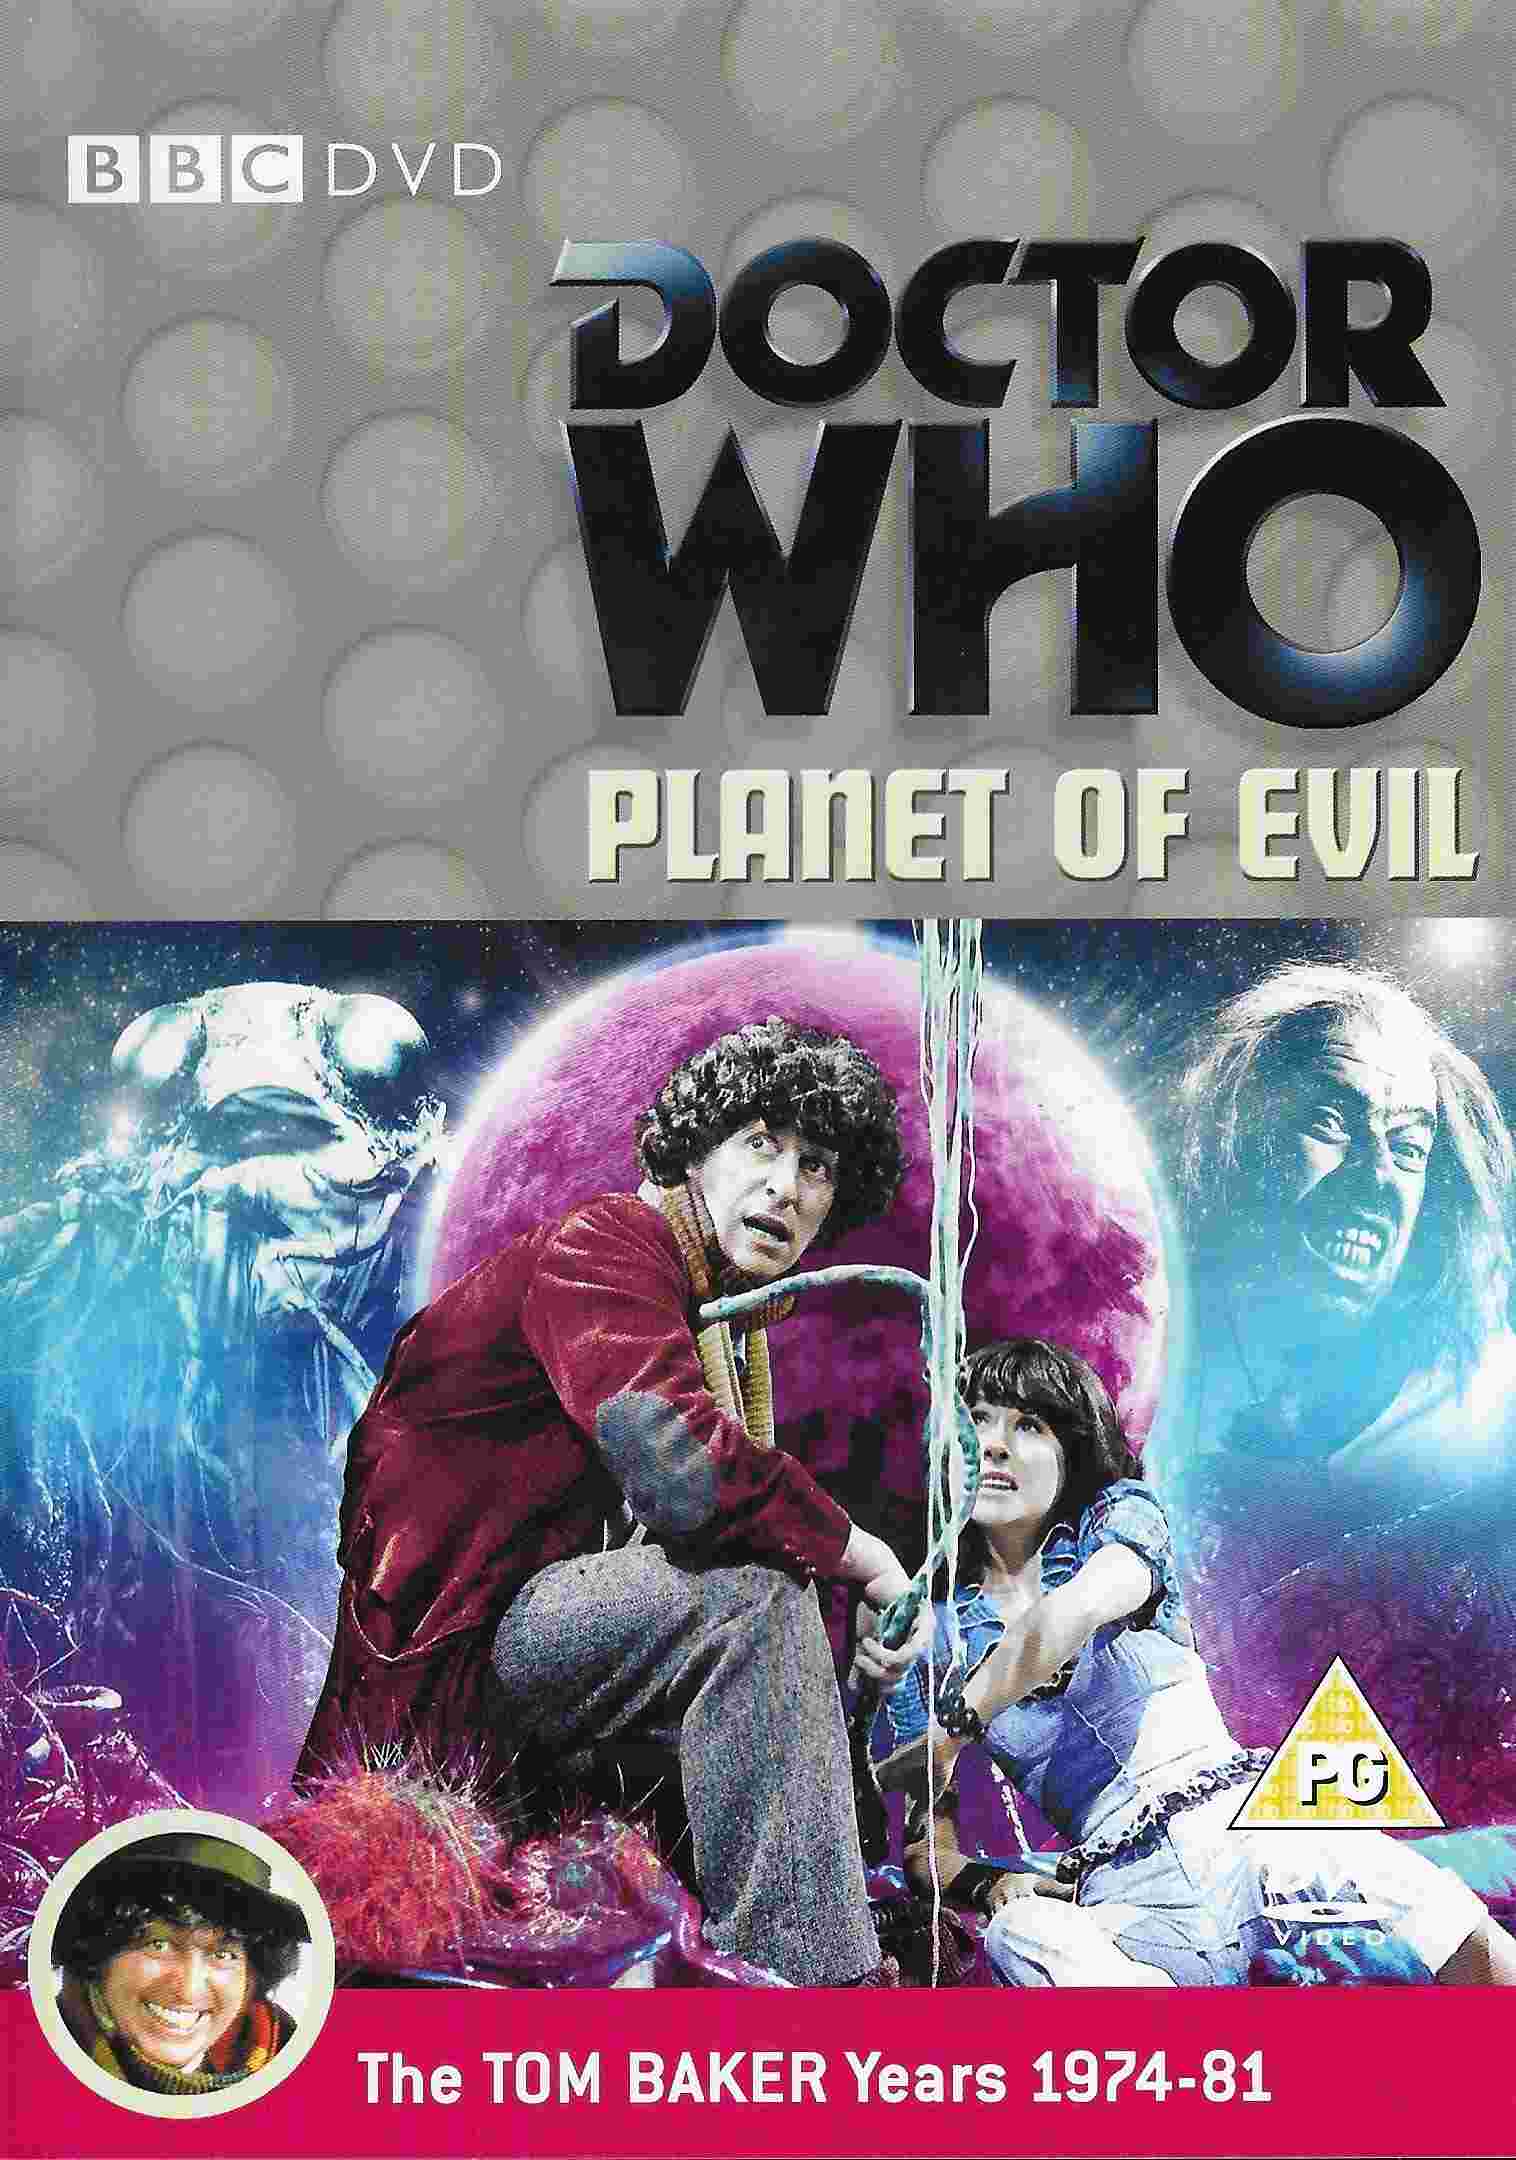 Picture of BBCDVD 1814 Doctor Who - Planet of evil by artist Louis Marks from the BBC dvds - Records and Tapes library